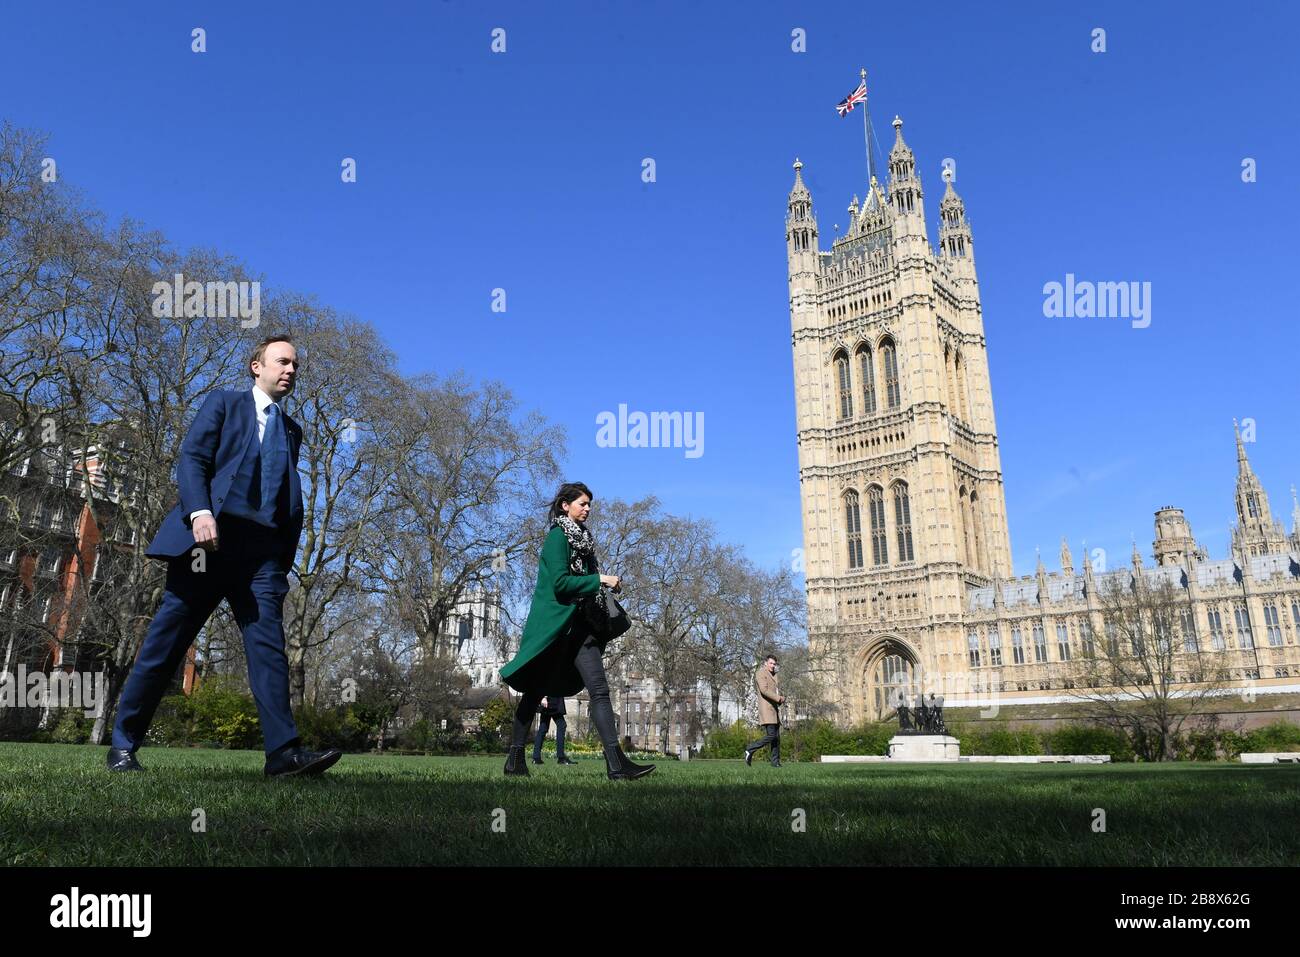 Health Secretary Matt Hancock walks to give interviews in Victoria Tower Gardens, London, as Prime Minister Boris Johnson has said the Government is ready to impose tougher restrictions to curb the spread of the coronavirus if people do not follow the guidance on social distancing. Stock Photo